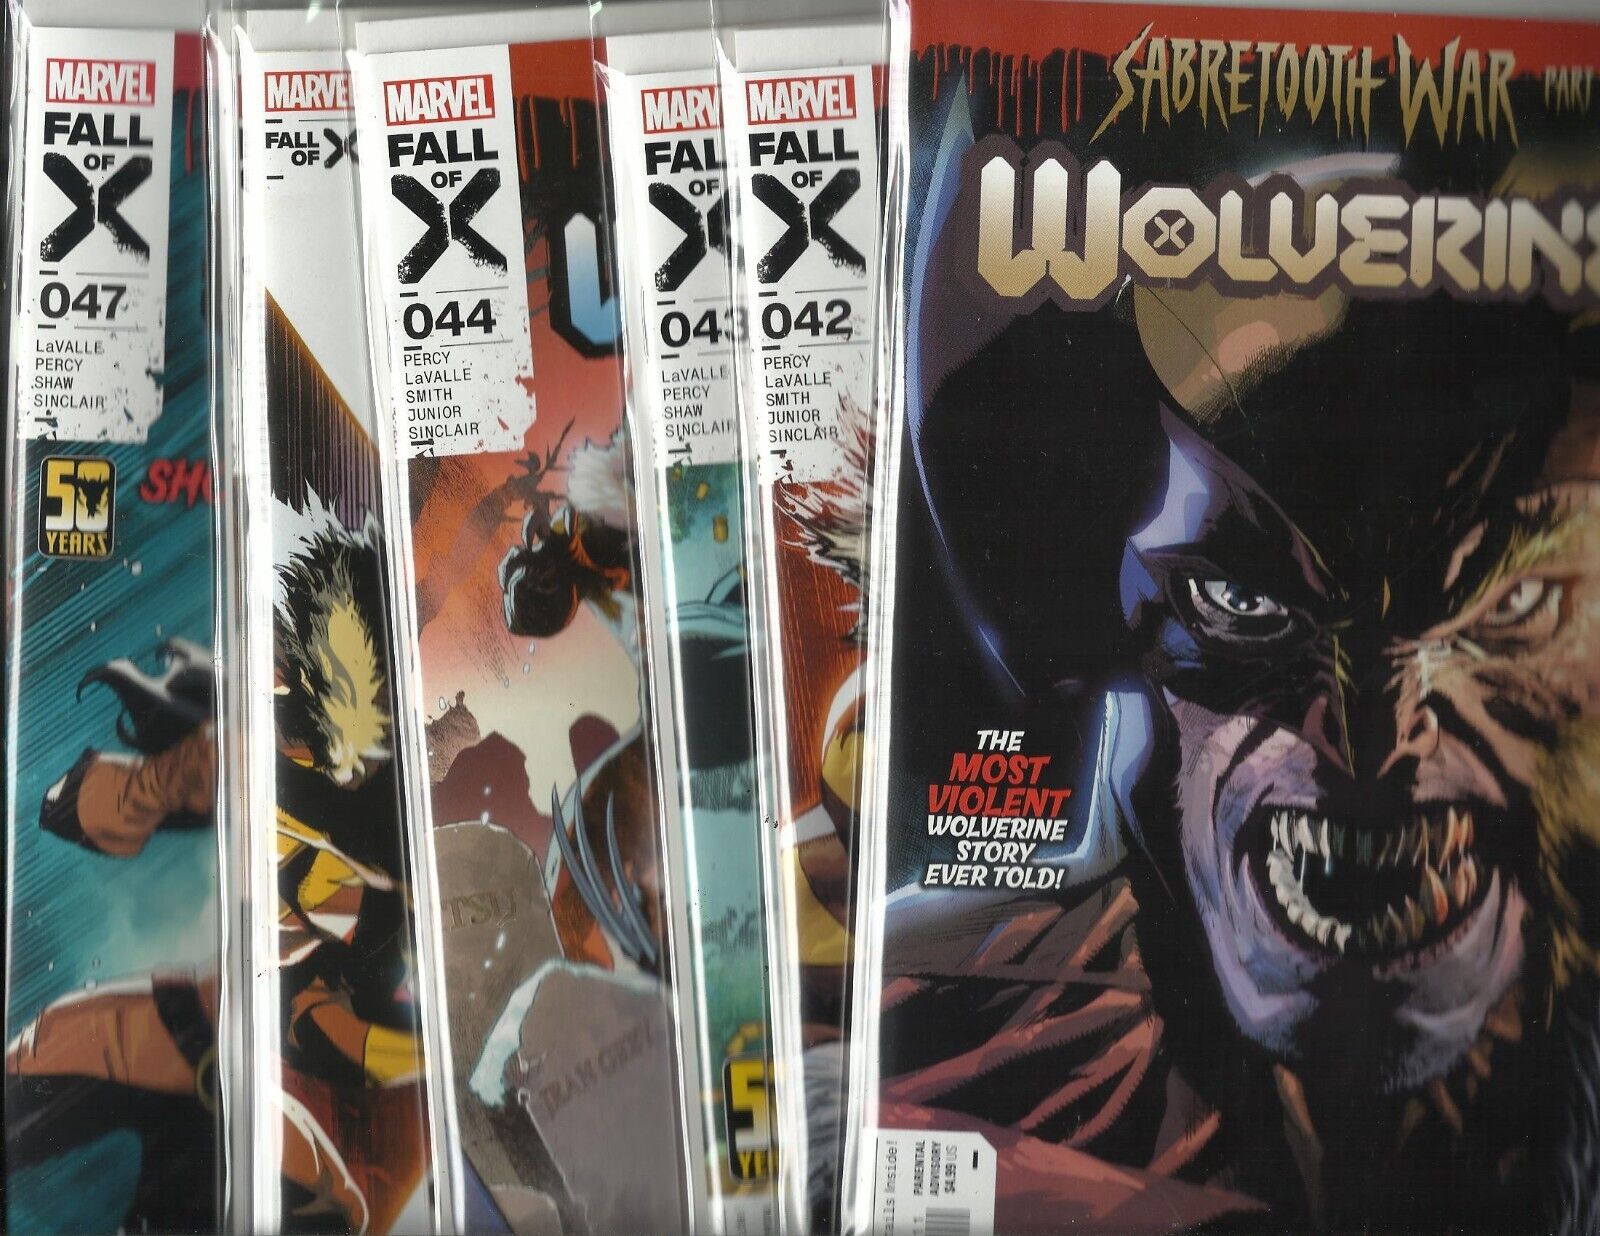 Wolverine #41 - 50 - Sabretooth War Part 1 to 10 - all Cover A - NM 9.4